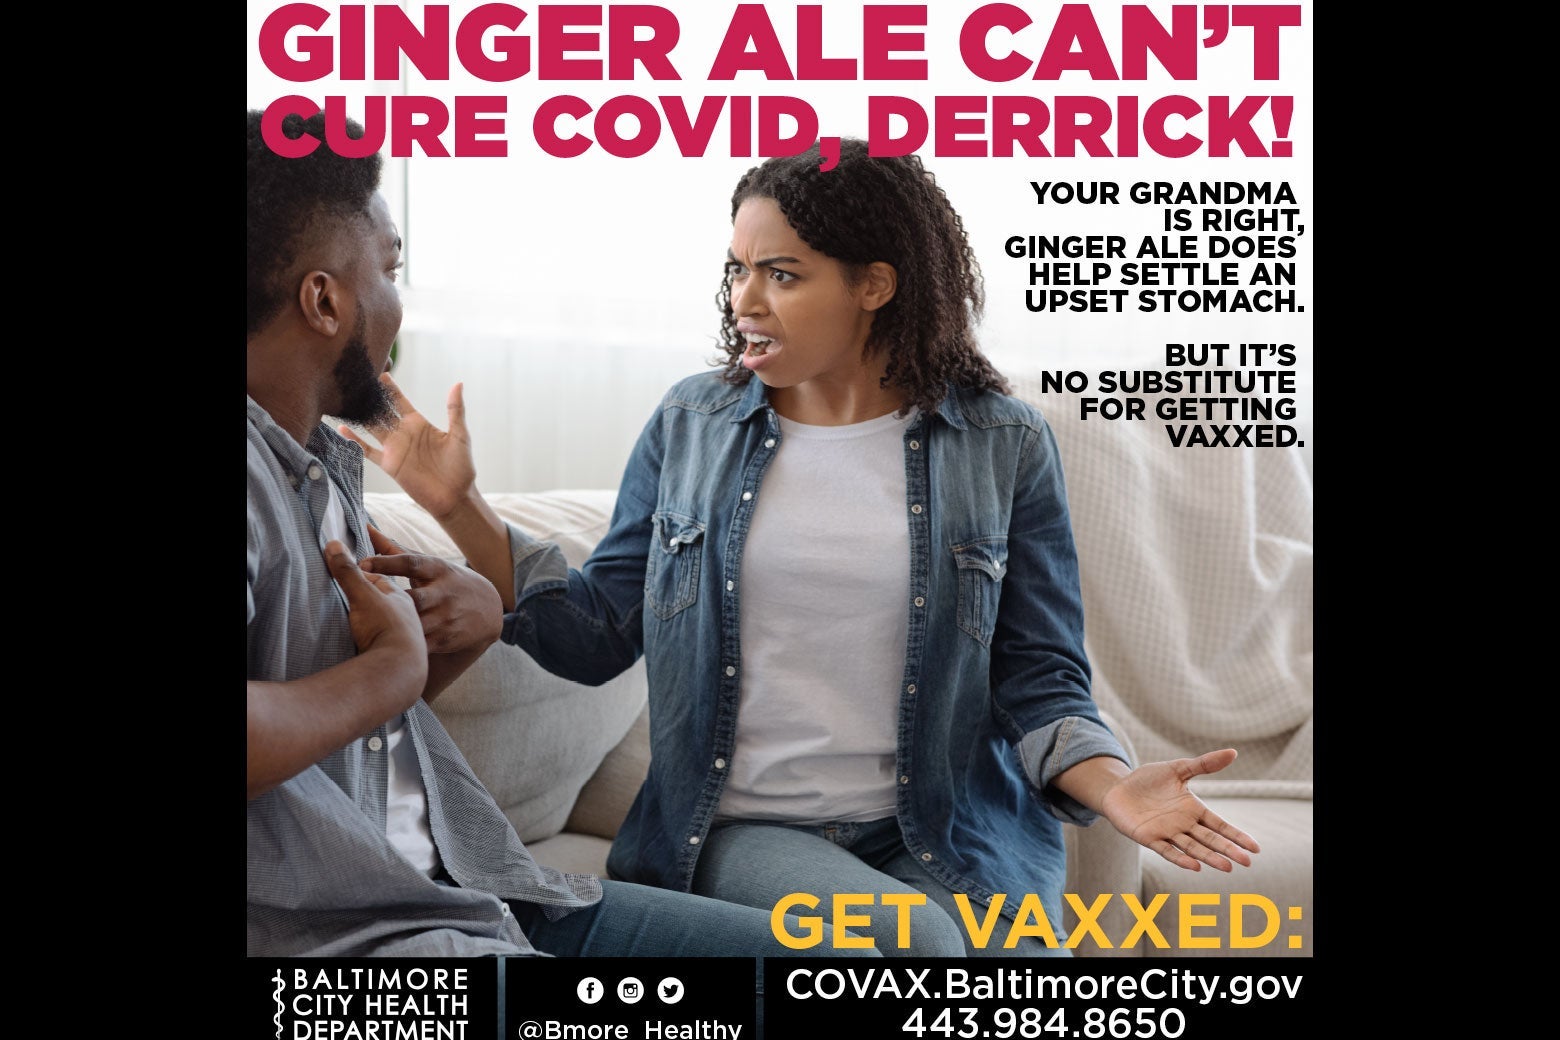 An ad featuring a woman looking exasperated at a man, and saying, "Ginger ale doesn't cure COVID, Derrick!"